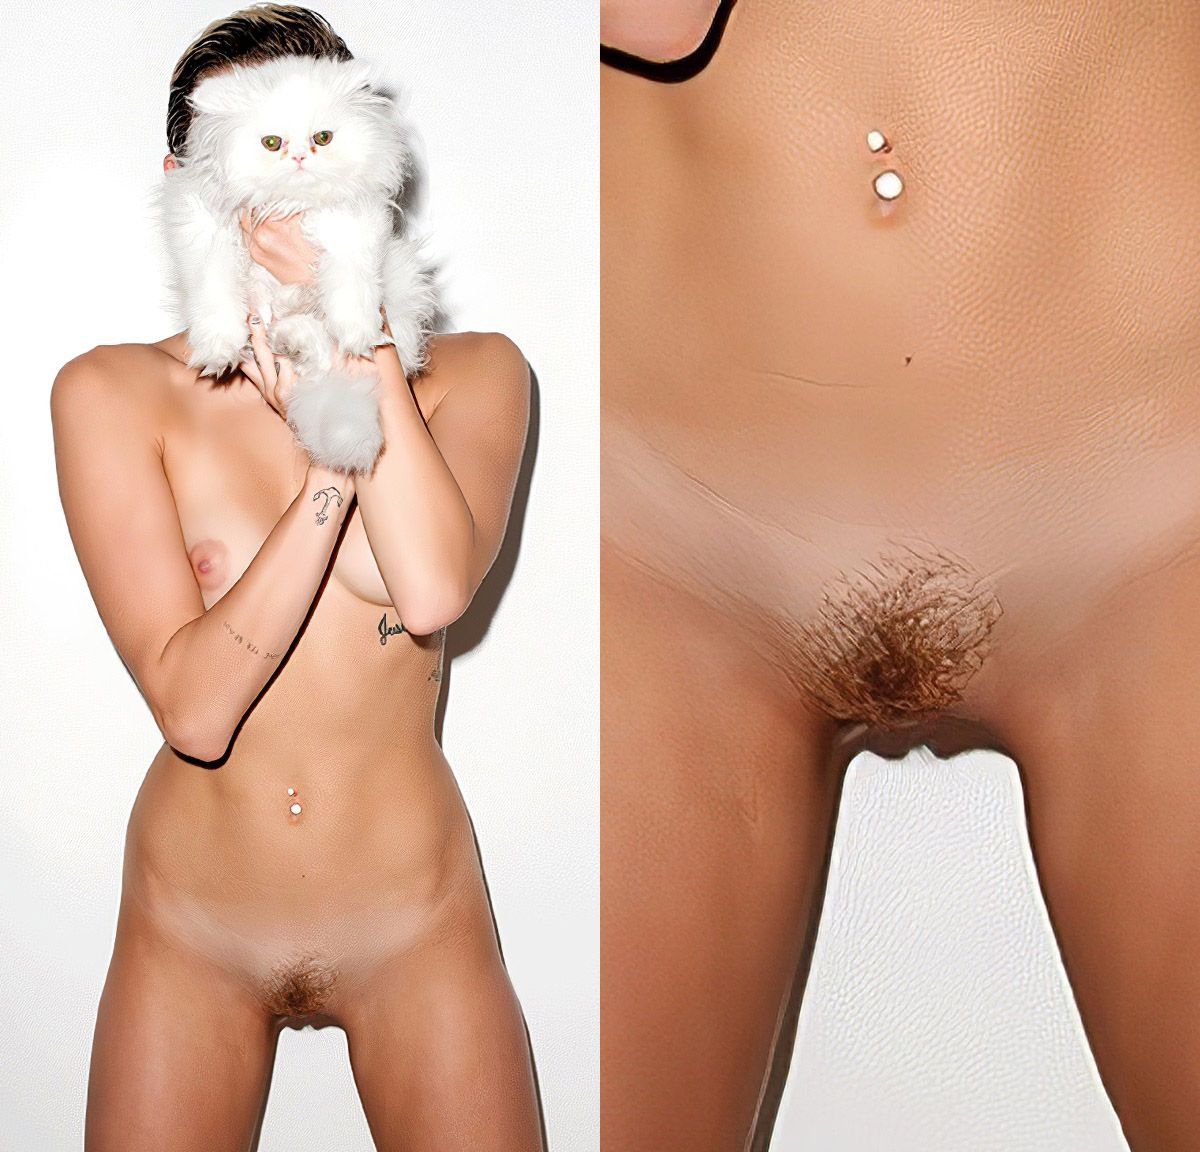 Porn Miley Cyrus Pussy - Big Photo Collection Dedicated Solely to Miley Cyrus' Pussy - The Fappening!